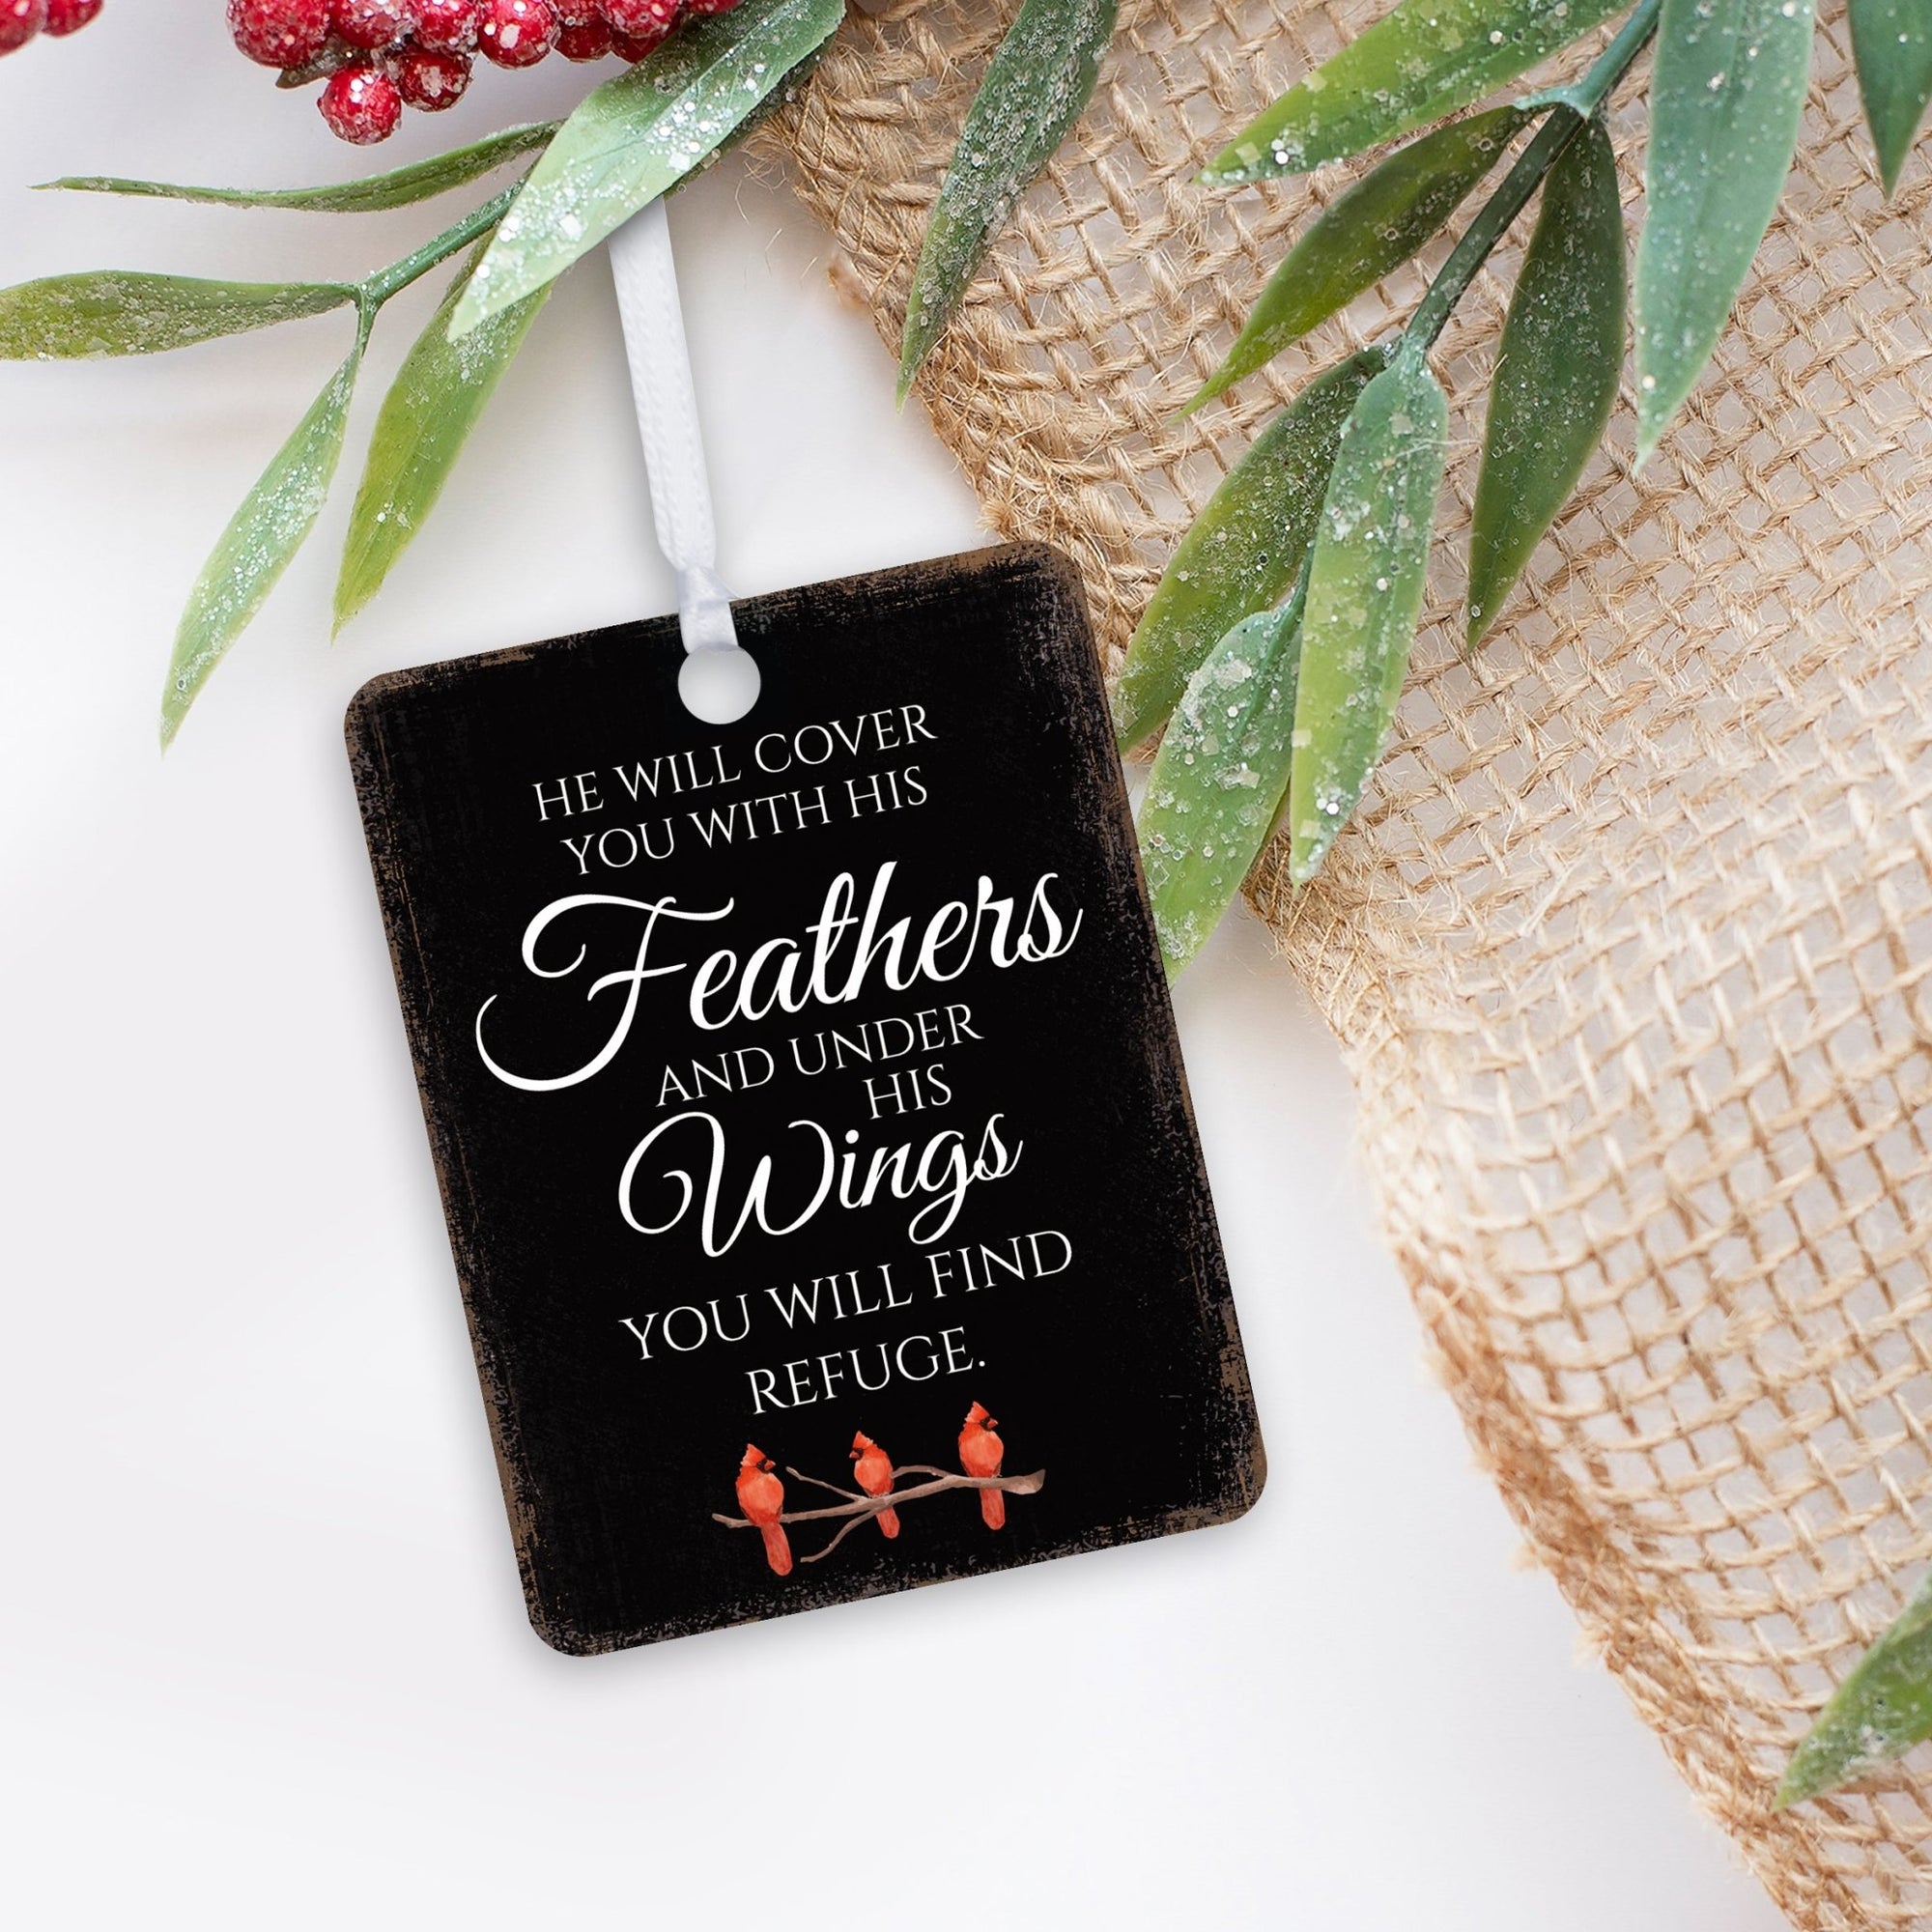 Elegant Vertical Cardinal Wooden Ornament With Everyday Verses Gift Ideas - He Will Cover - LifeSong Milestones